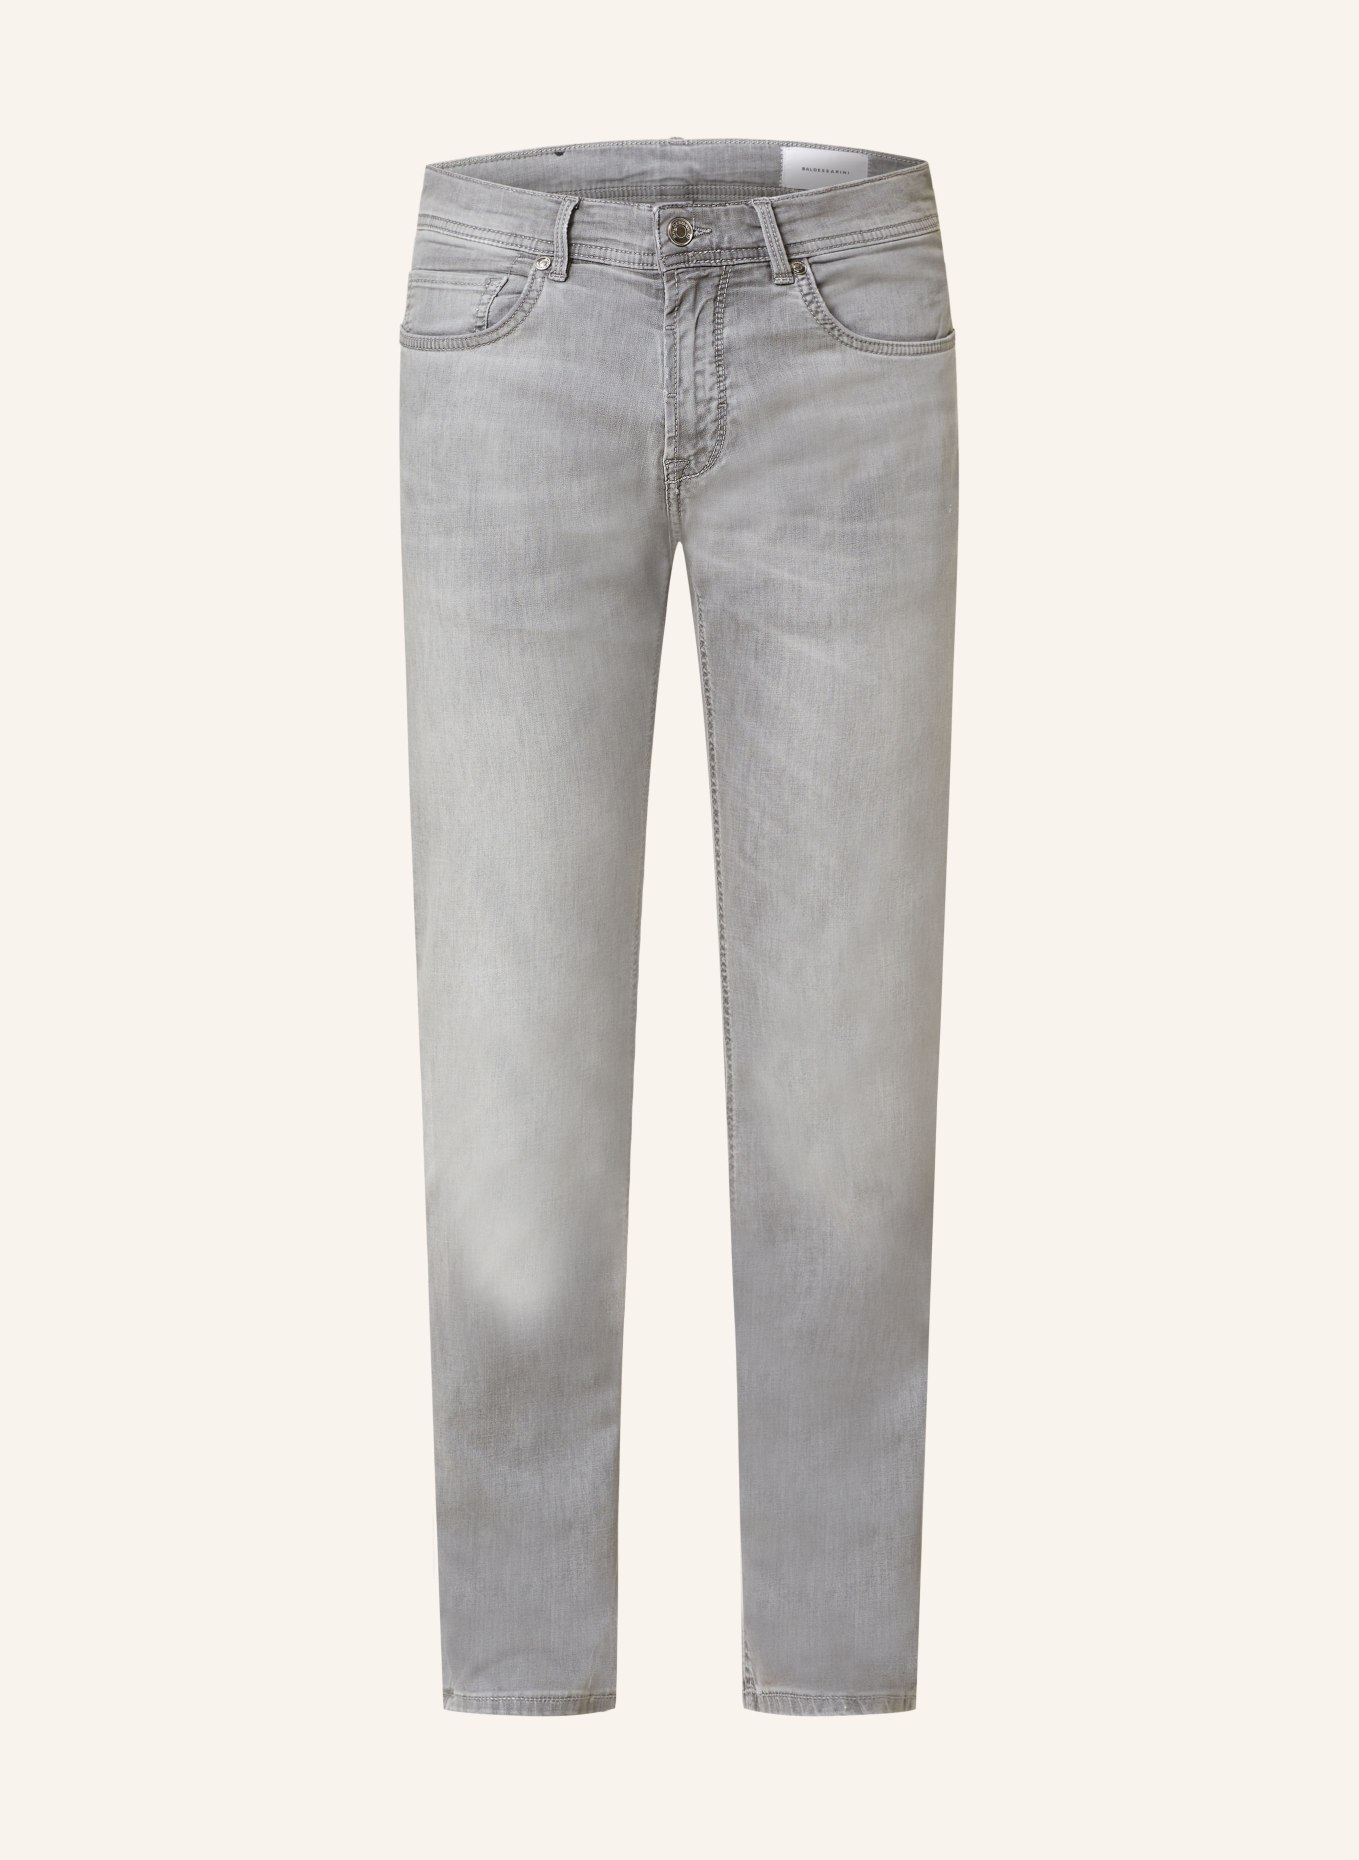 BALDESSARINI Jeans regular fit, Color: 9854 silver used buffies (Image 1)